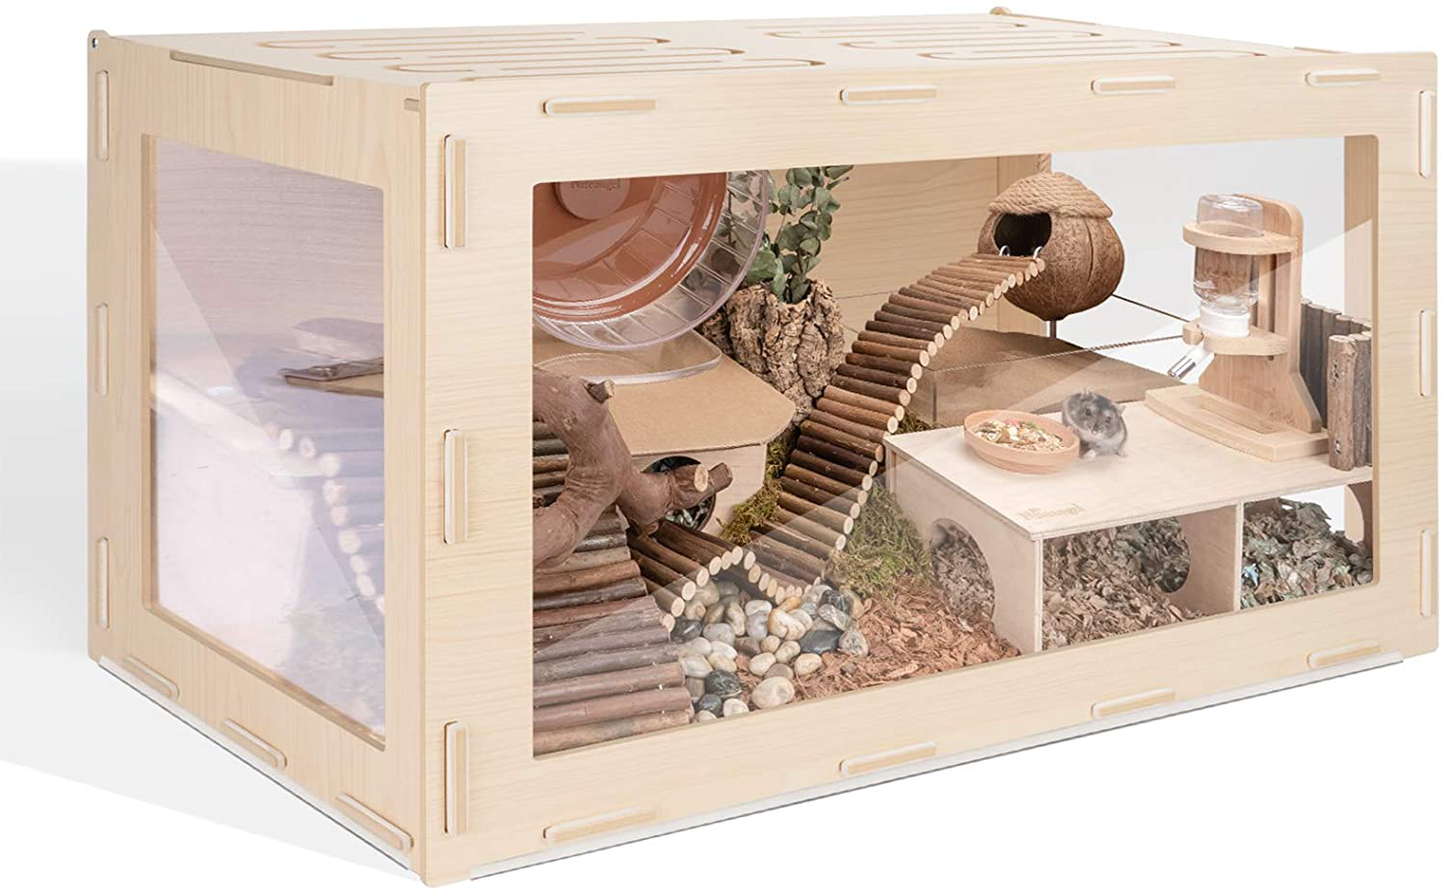 Niteangel Bigger World - MDF Aspen Small Animal Cage for Hamsters Degus Mices or Other Similar-Sized Pets Animals & Pet Supplies > Pet Supplies > Small Animal Supplies > Small Animal Habitats & Cages Niteangel Burlywood 30 x 15 x 17.7 inches 